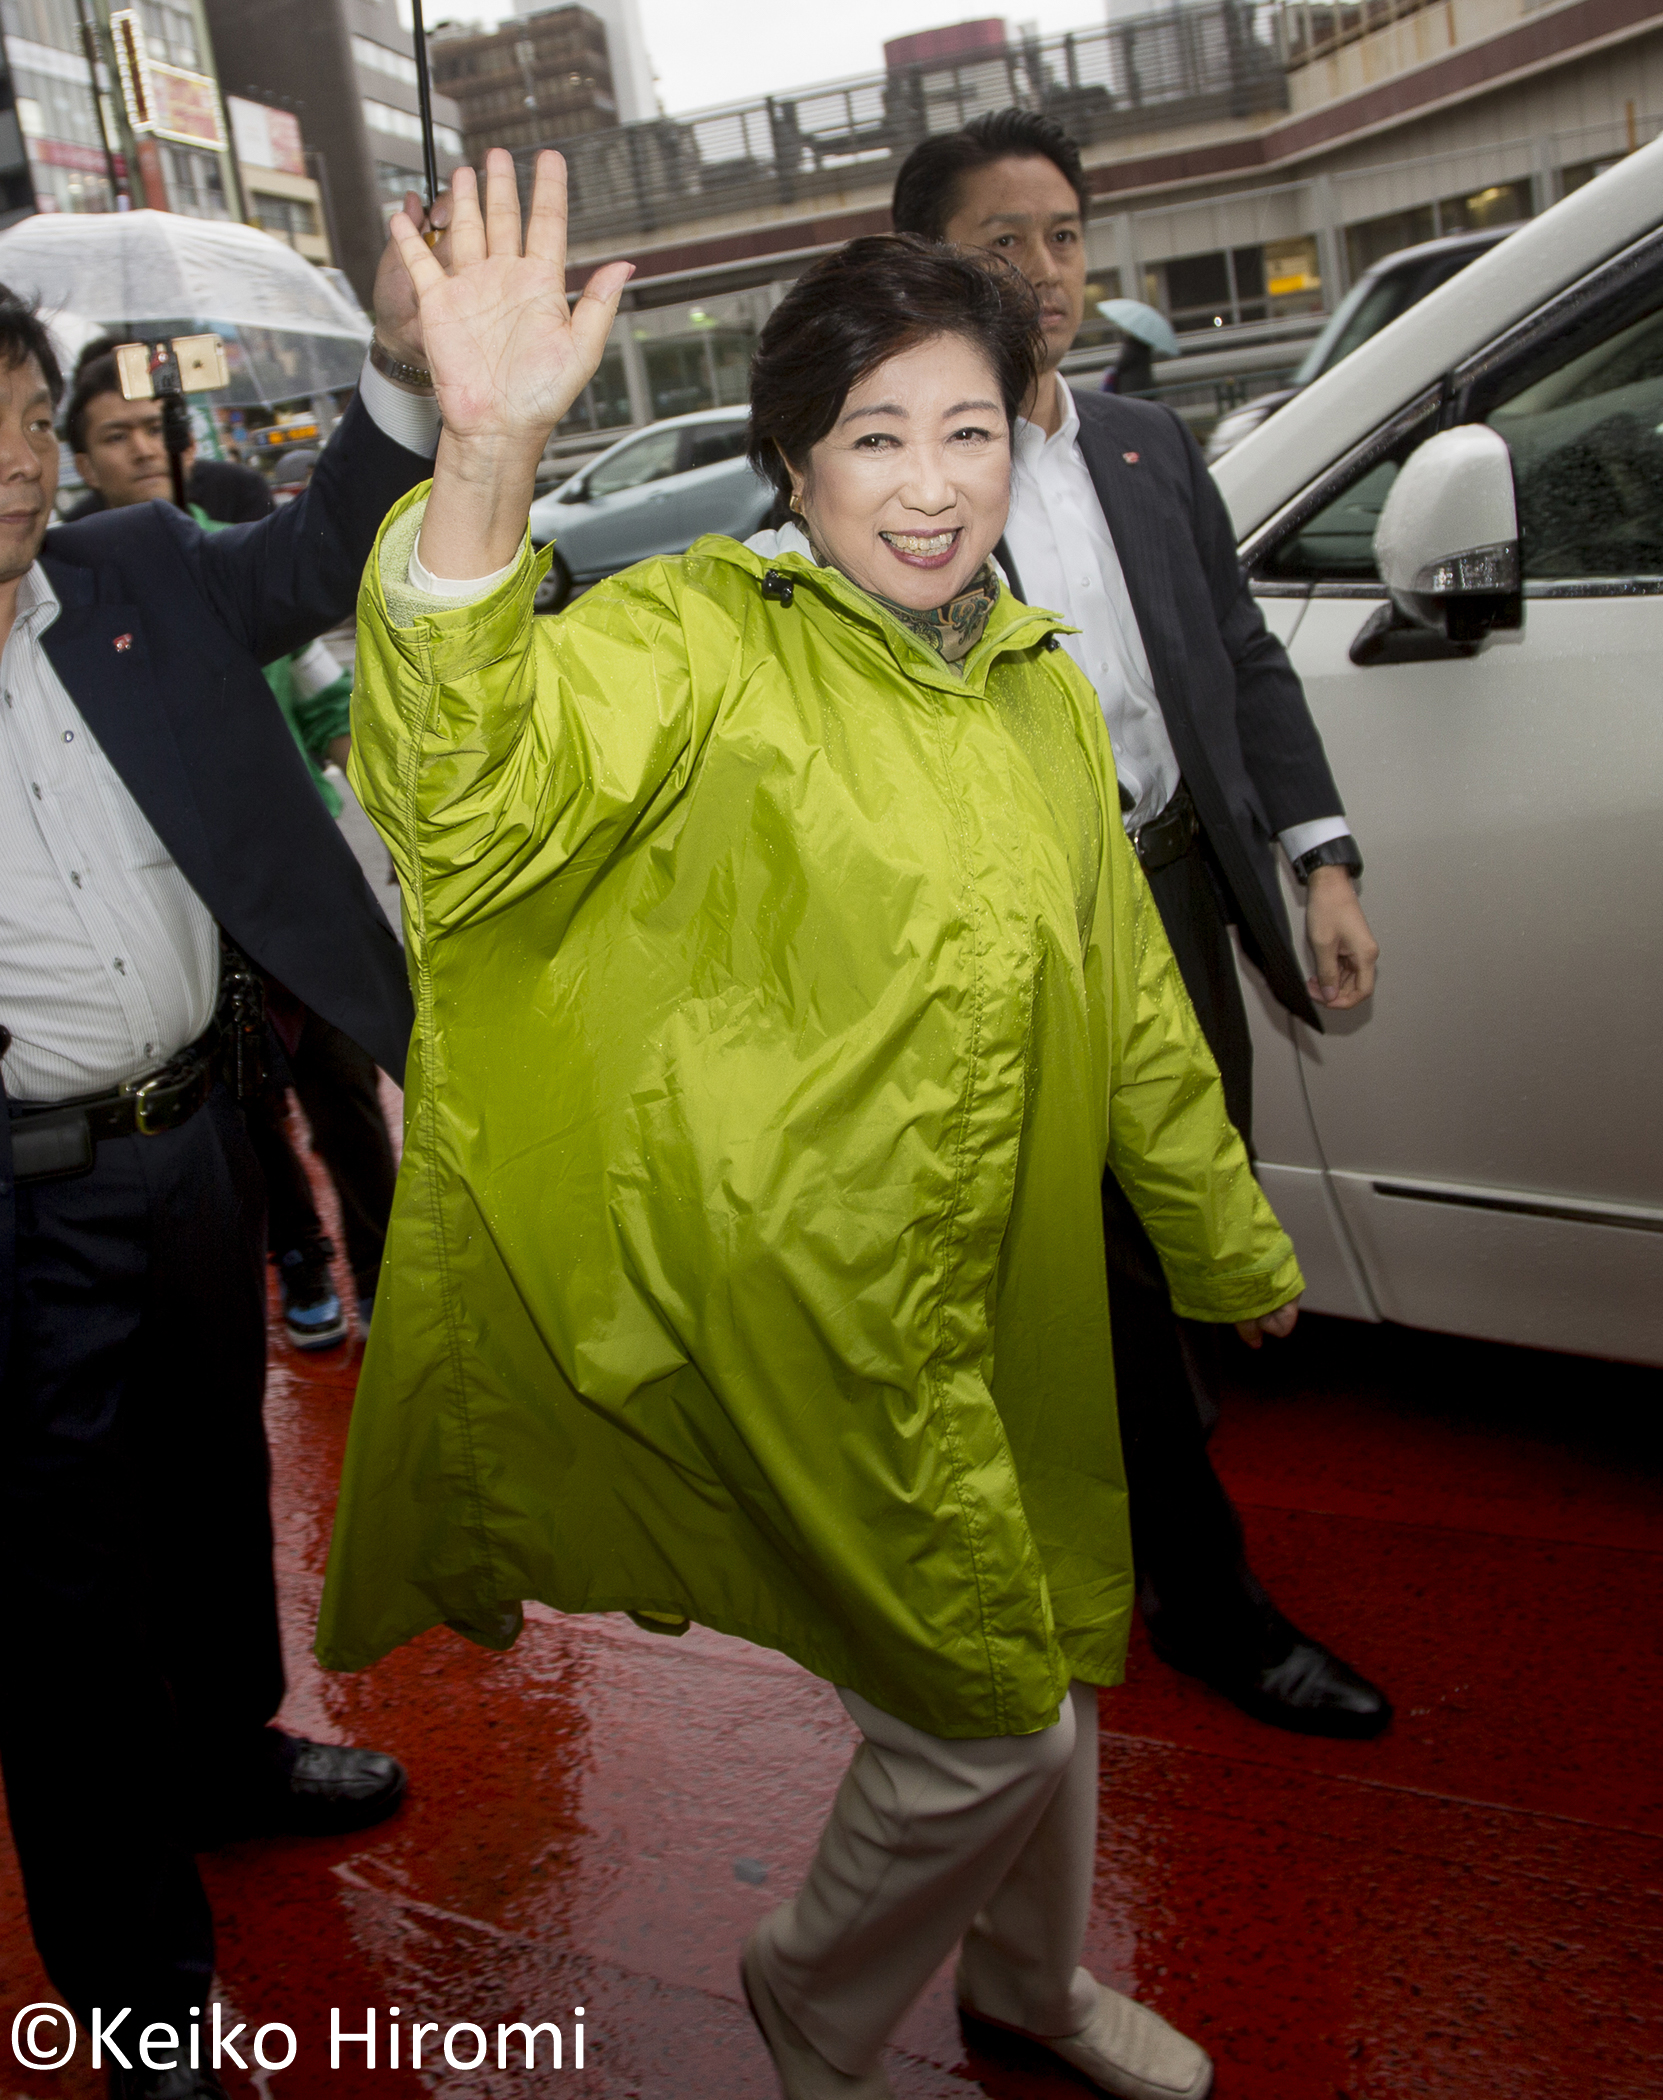  Yuriko Koike, Tokyo Governor and leader of Party of Hope, campaigning in Meguro, Tokyo, Japan on October 15, 2017. 